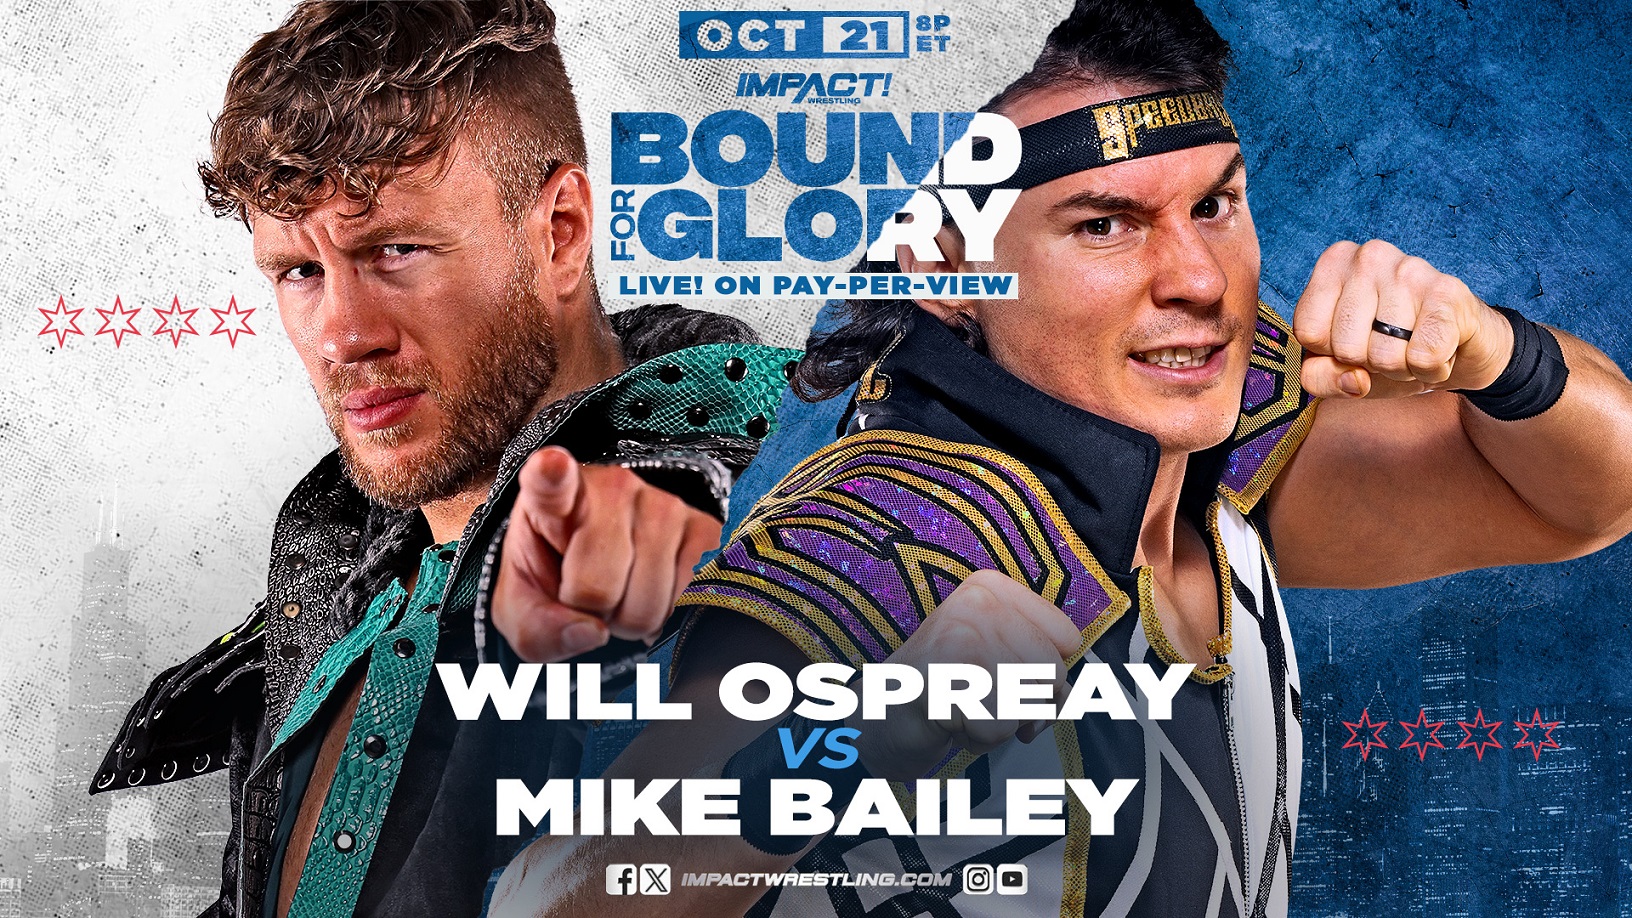 “The Aerial Assassin” Will Ospreay Battles “Speedball” Mike Bailey at Bound For Glory – IMPACT Wrestling